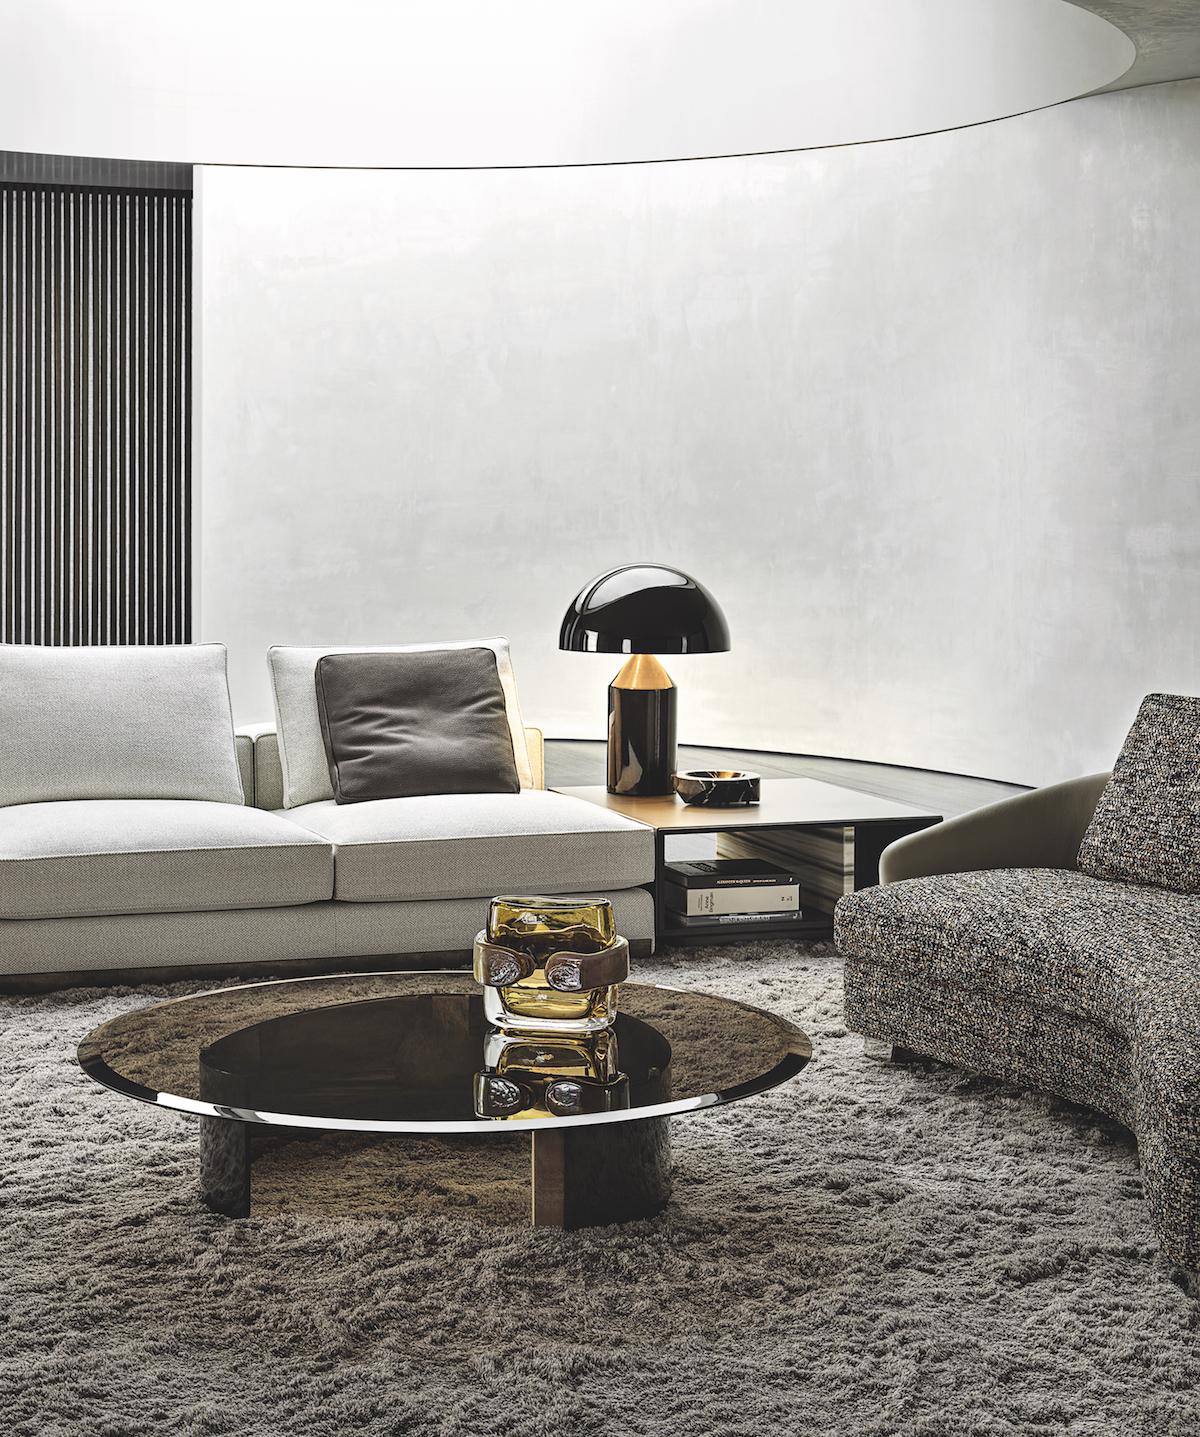 How Minotti Has Been Bringing La Dolce Vita into the Home